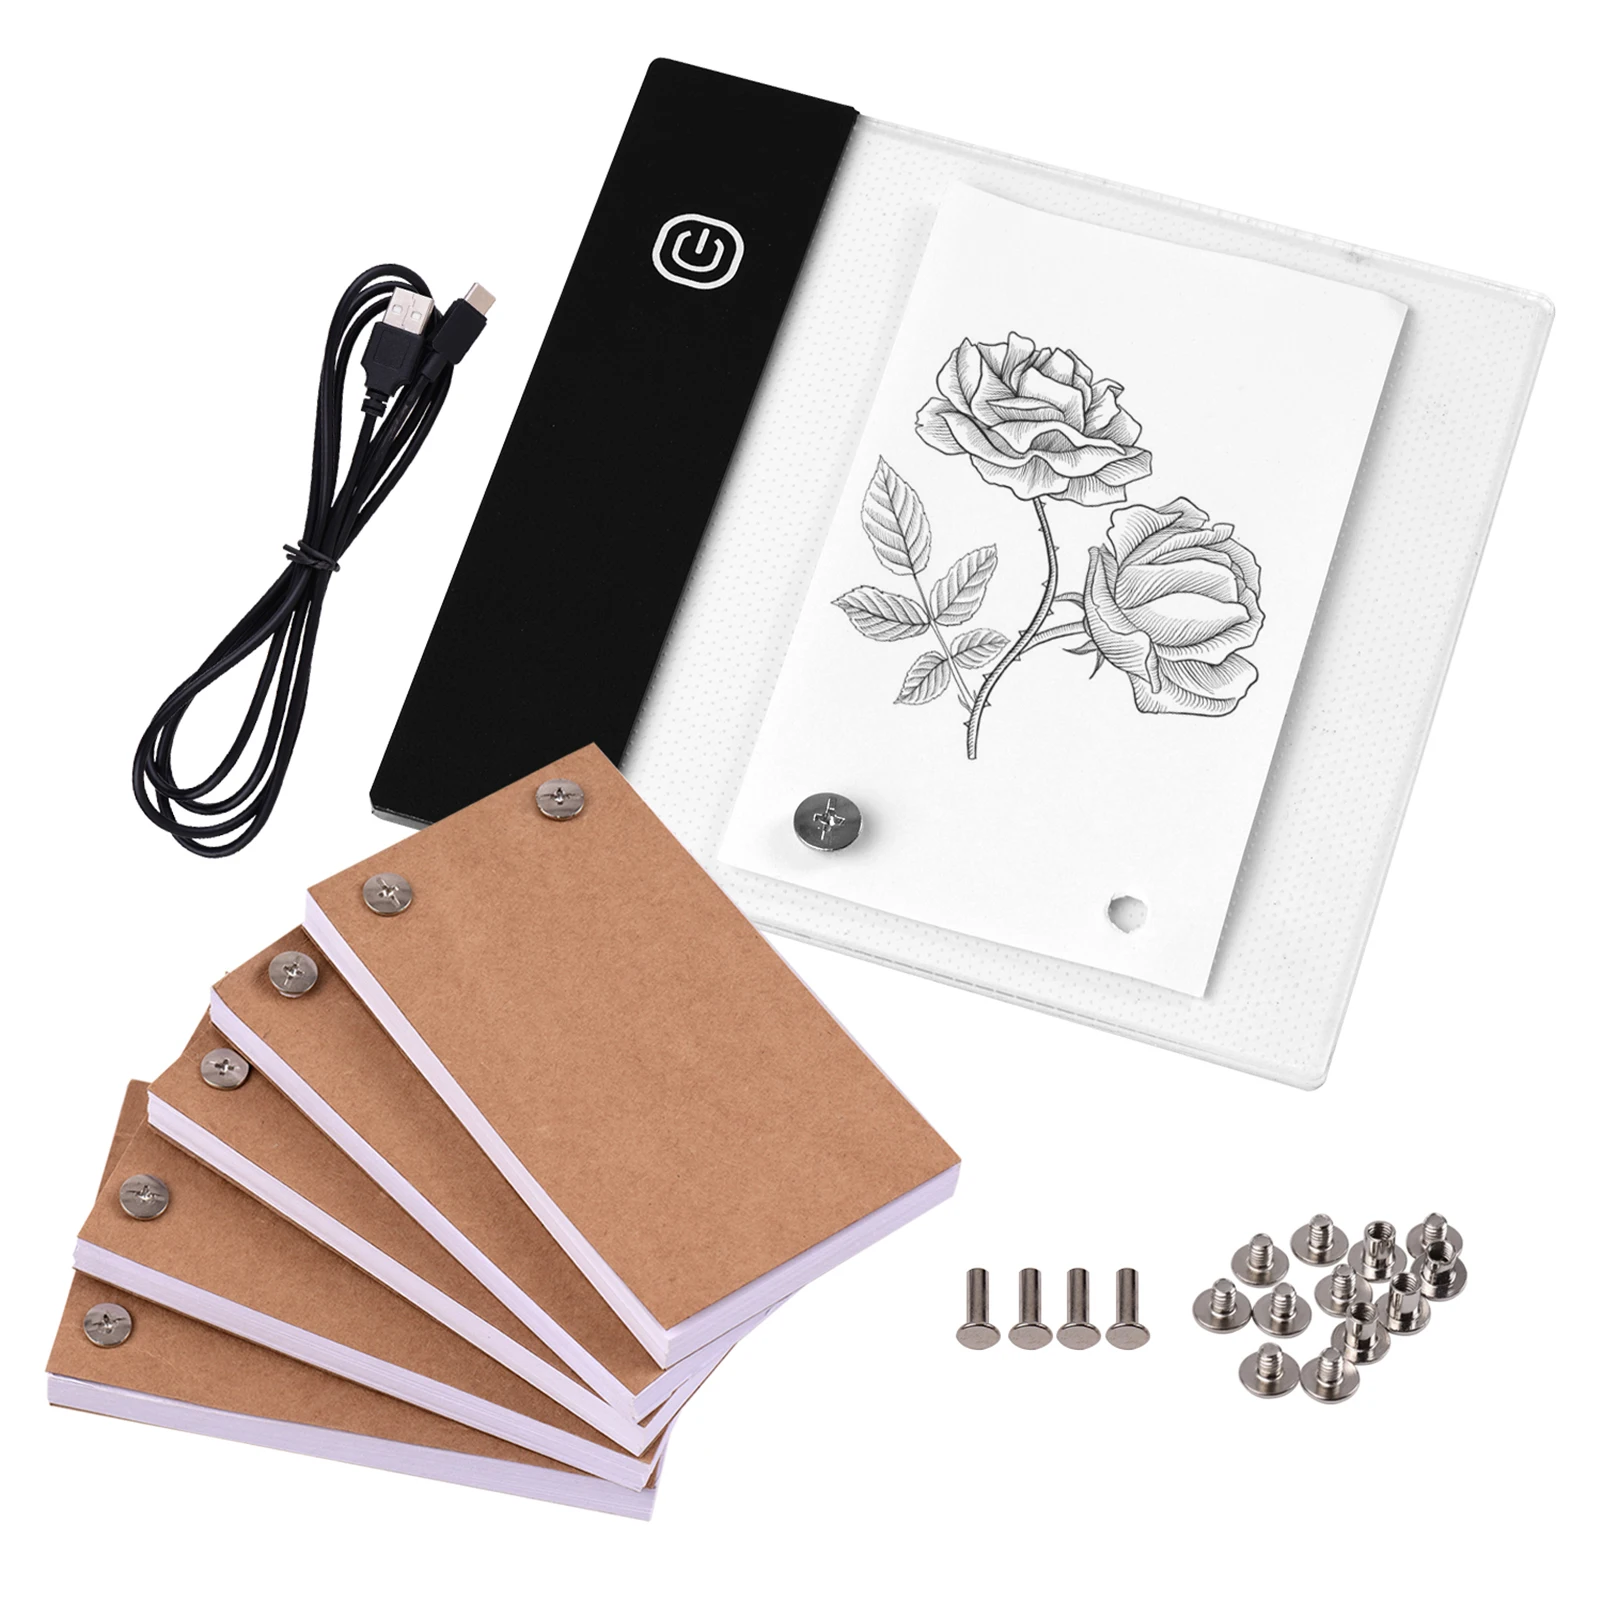 320 Sheets Animation Paper with Binding Screws LED Light Box with Flip Book Flip Book Kit with A4 Light Pad for Drawing and Tracing 